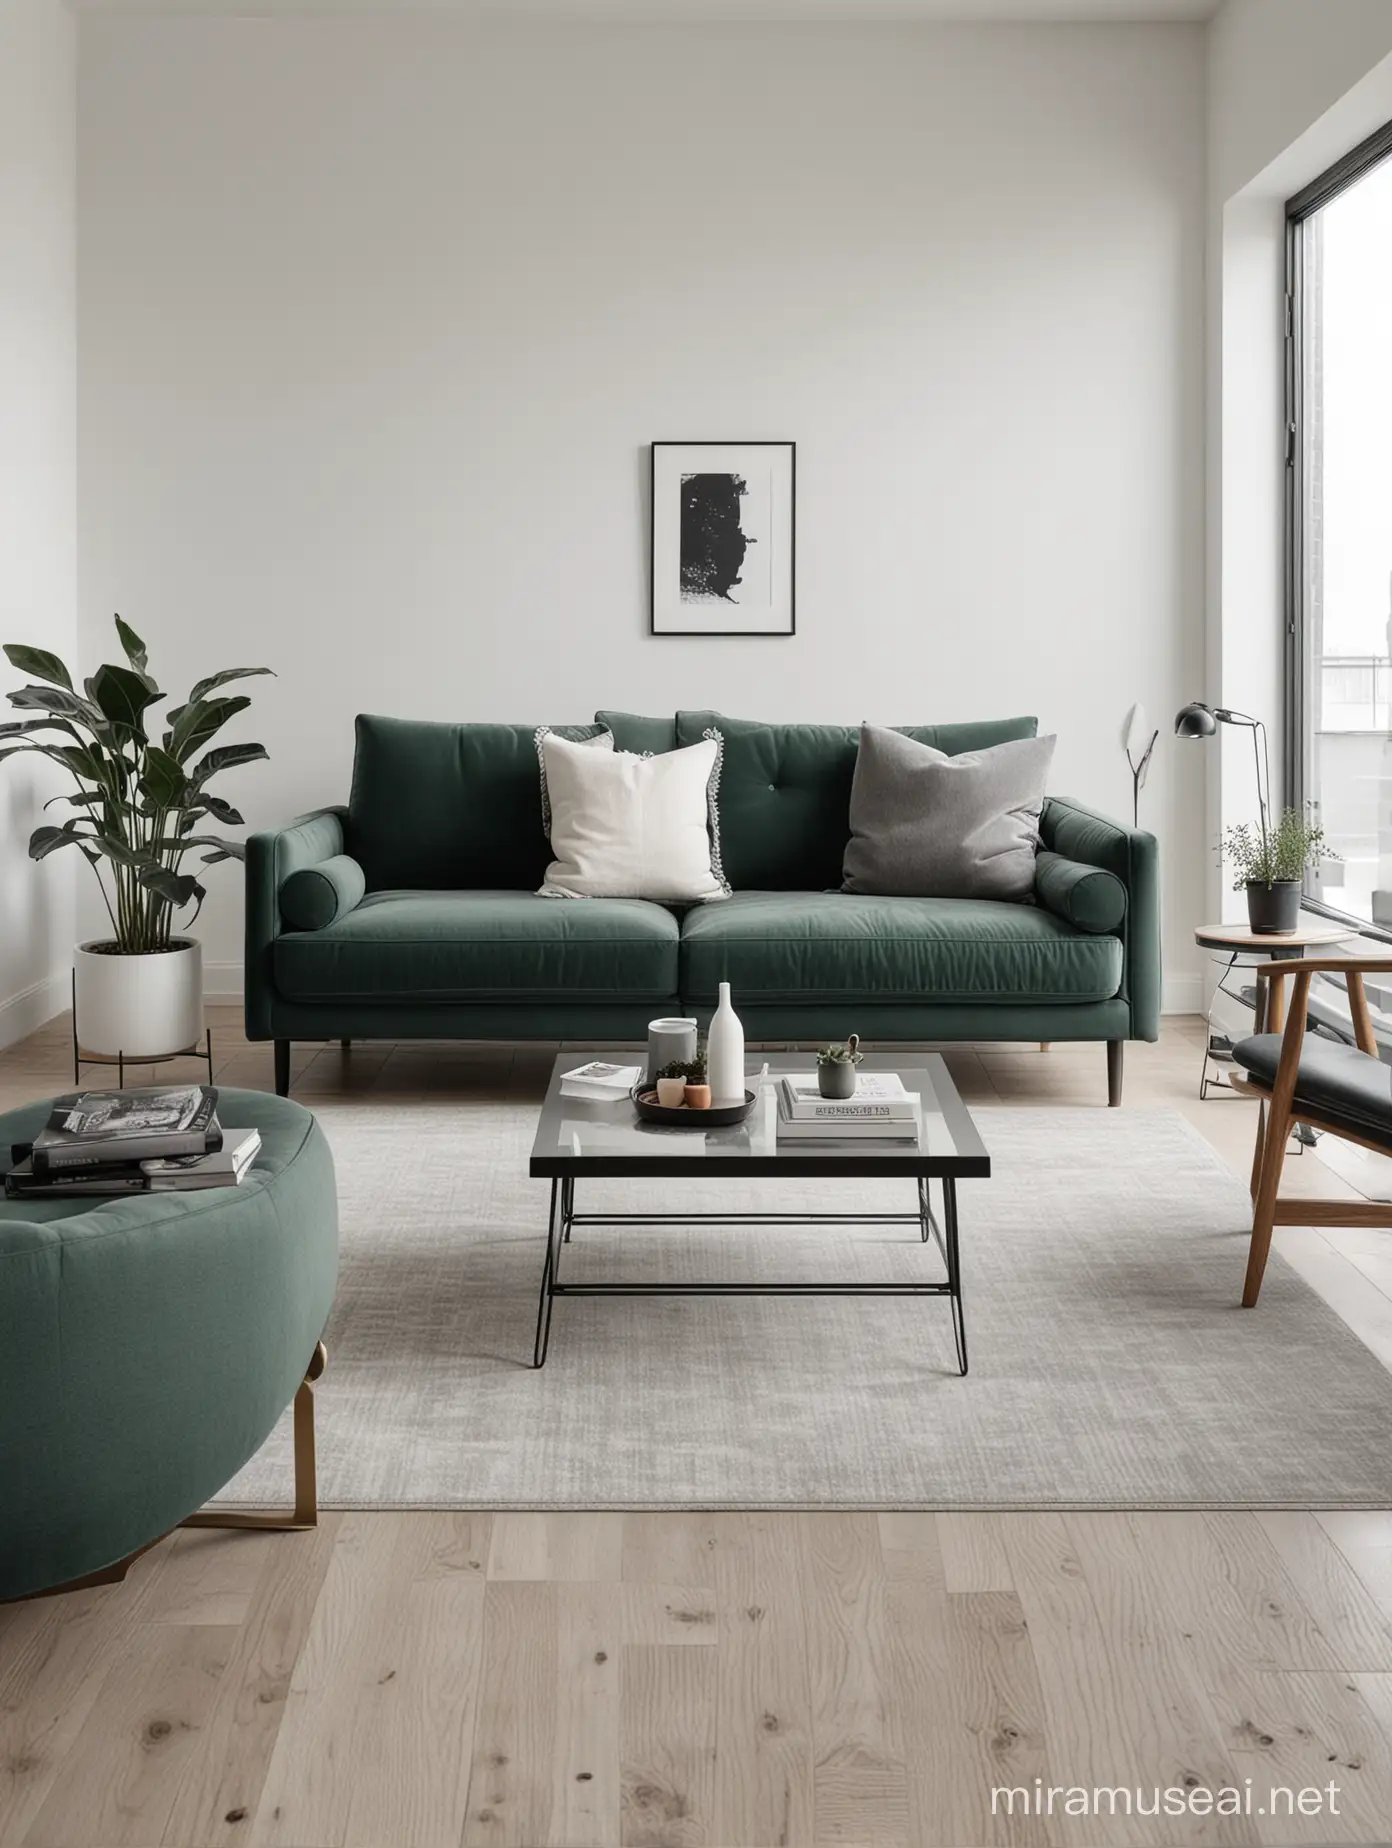 A minimalist living room featuring an dark green couch, white walls, grey accents, and sleek, modern furniture. Include subtle textures and clean lines, emphasizing simplicity and elegance.